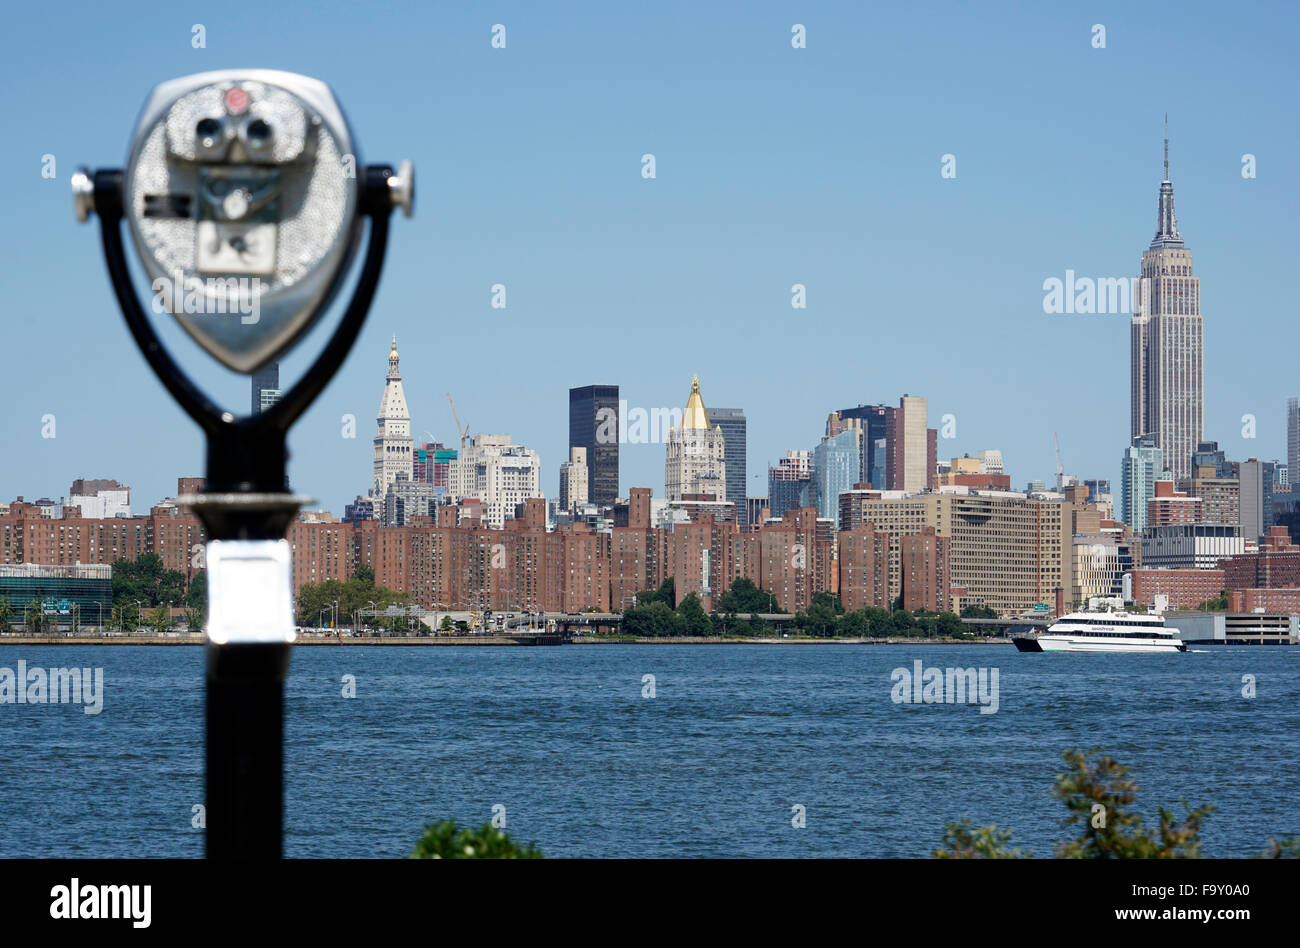 Day time view of Manhattan from Williamsburg Brooklyn with view of East River, New York City, USA Stock Photo